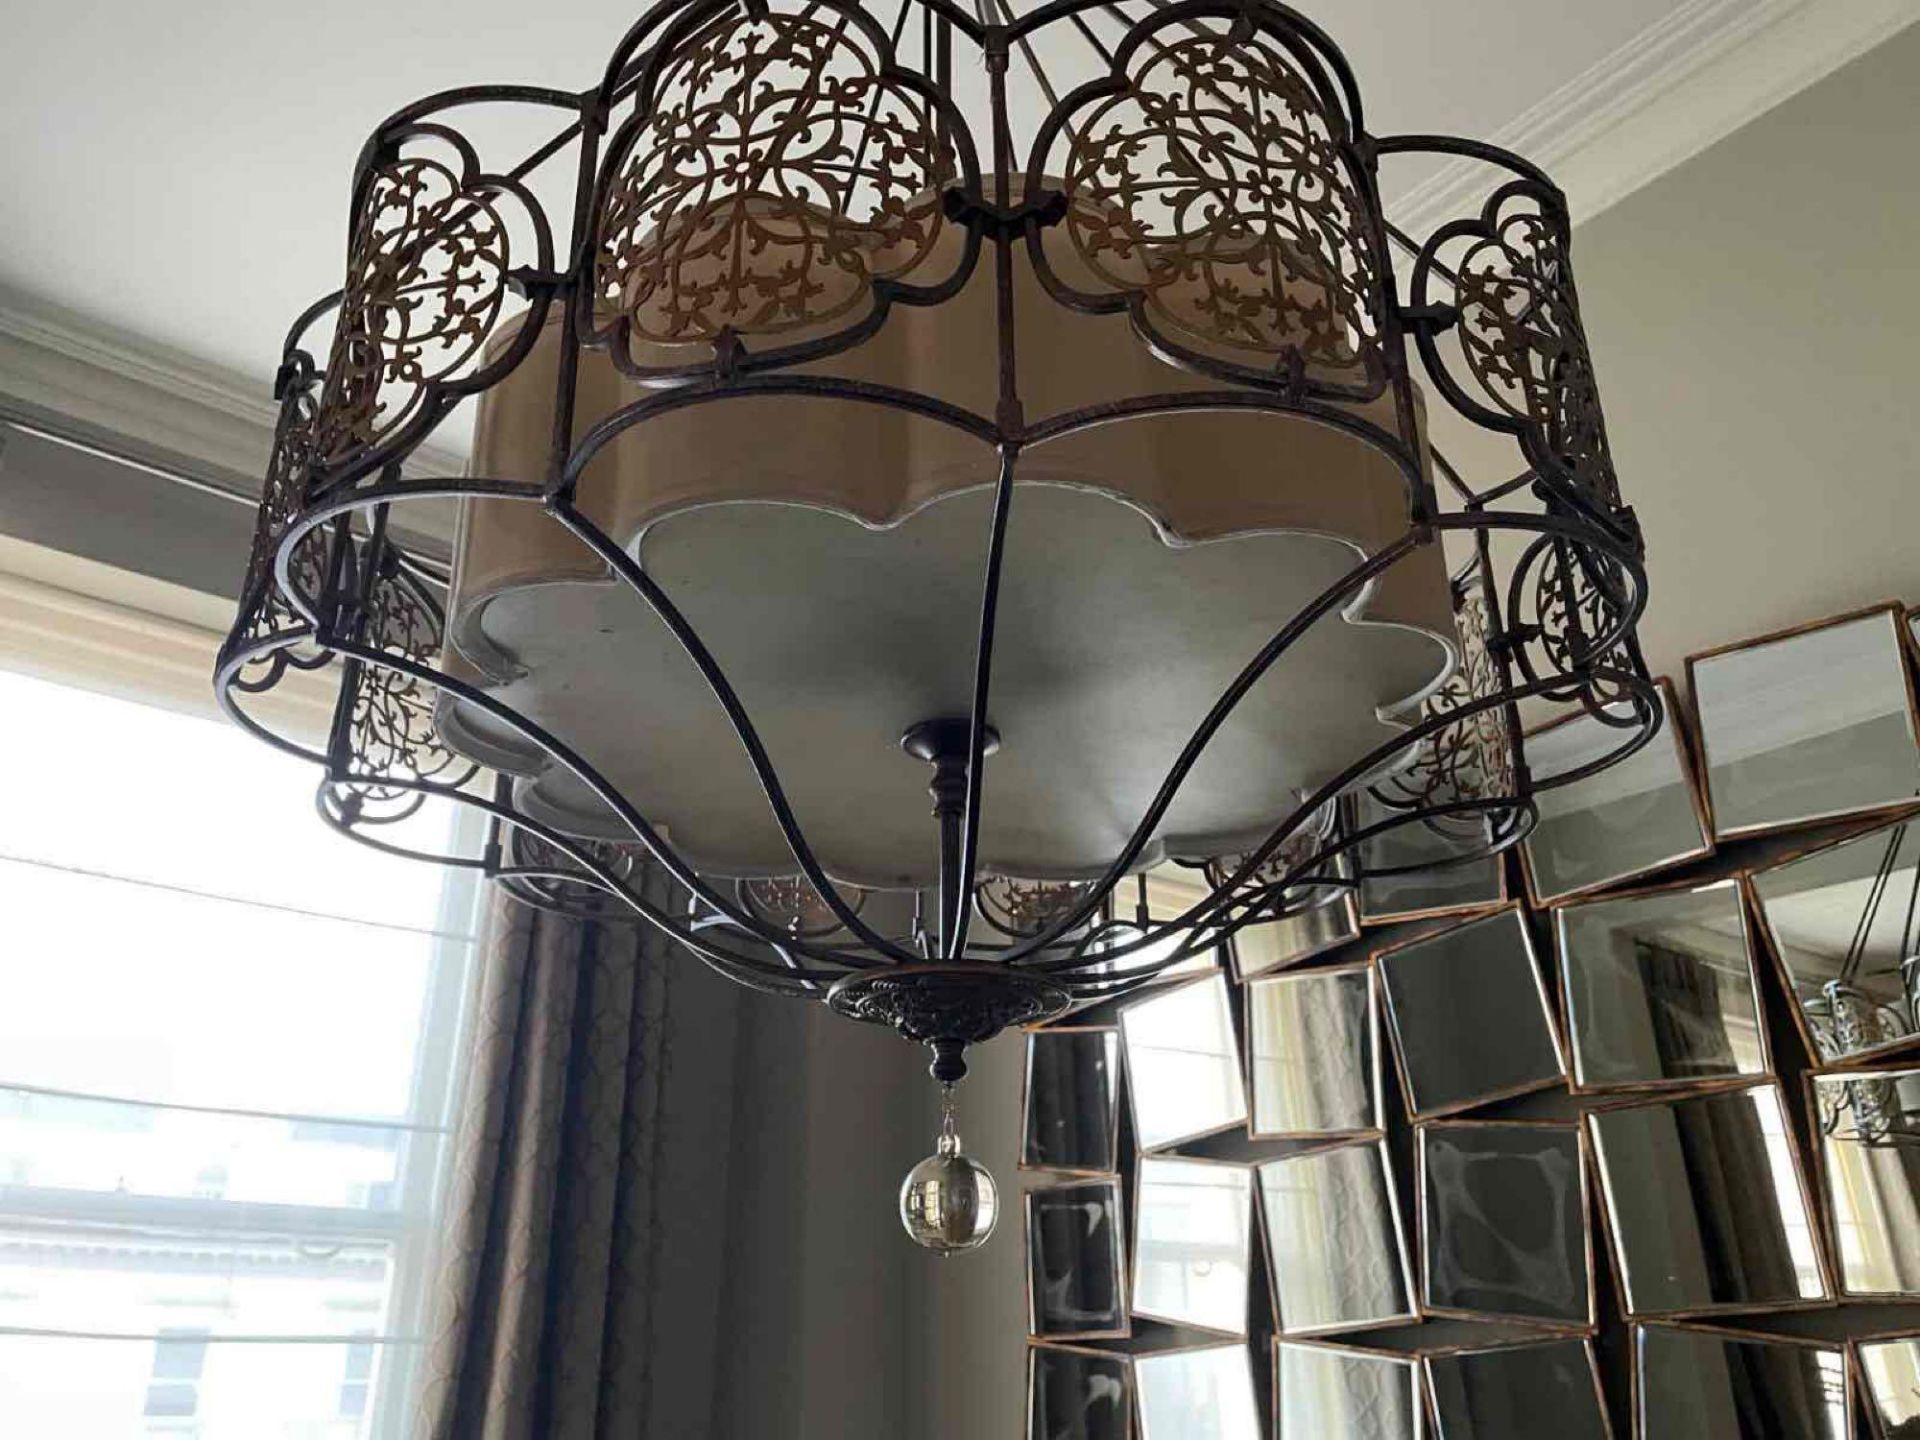 Feiss Marcella drum chandelier Featured in British bronze and oxidized bronze finishes with - Image 3 of 3